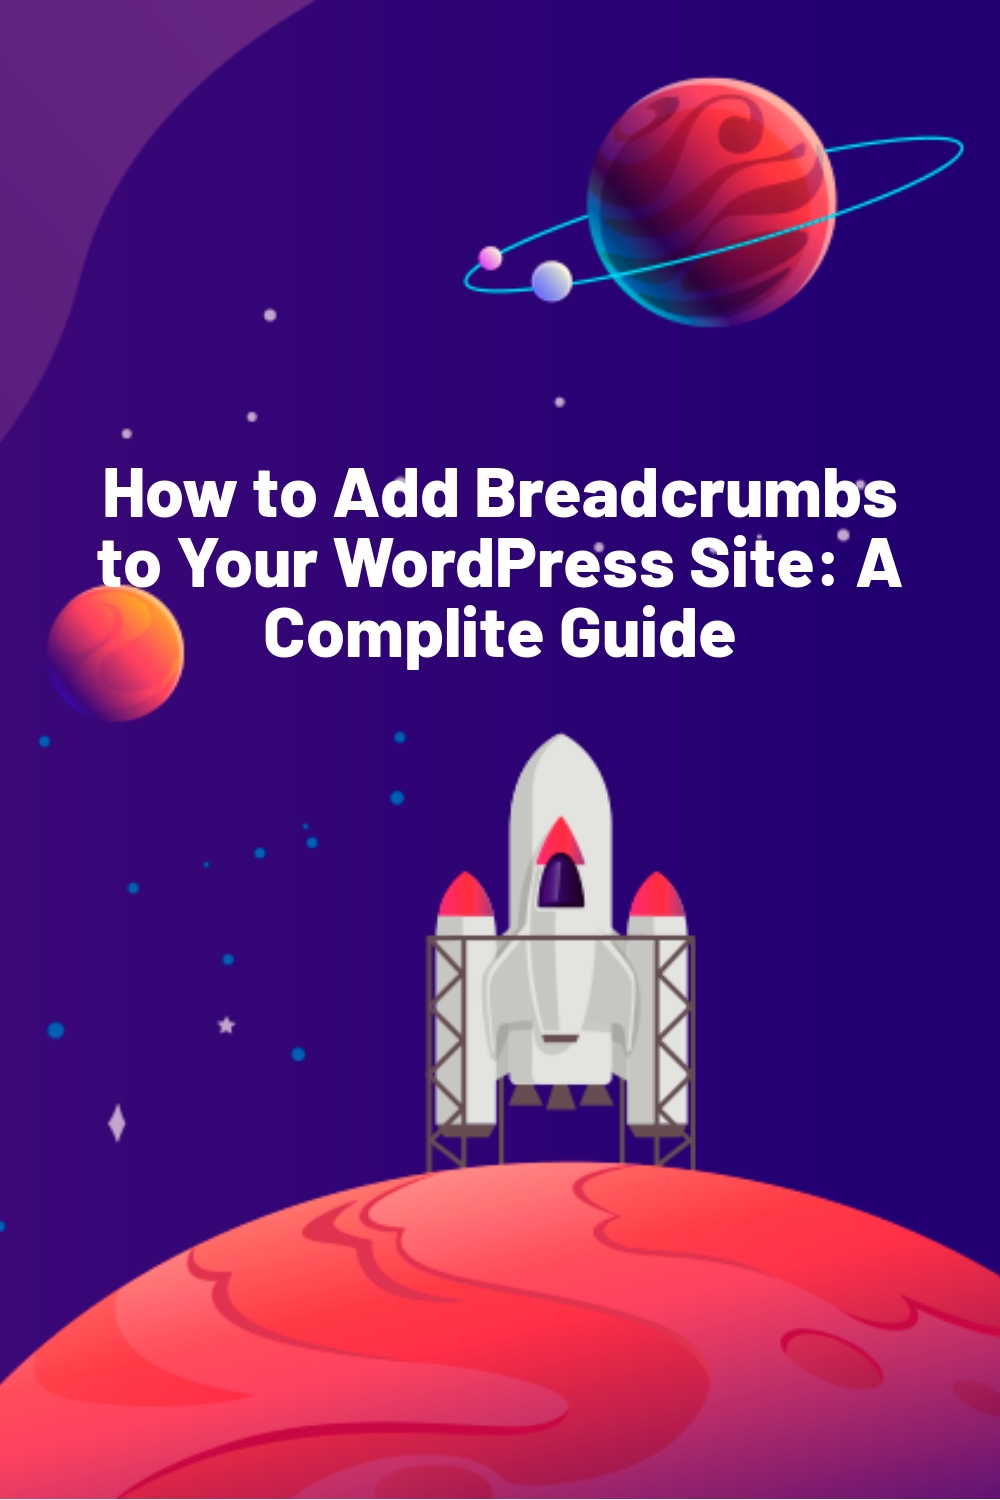 How to Add Breadcrumbs to Your WordPress Site: A Complite Guide